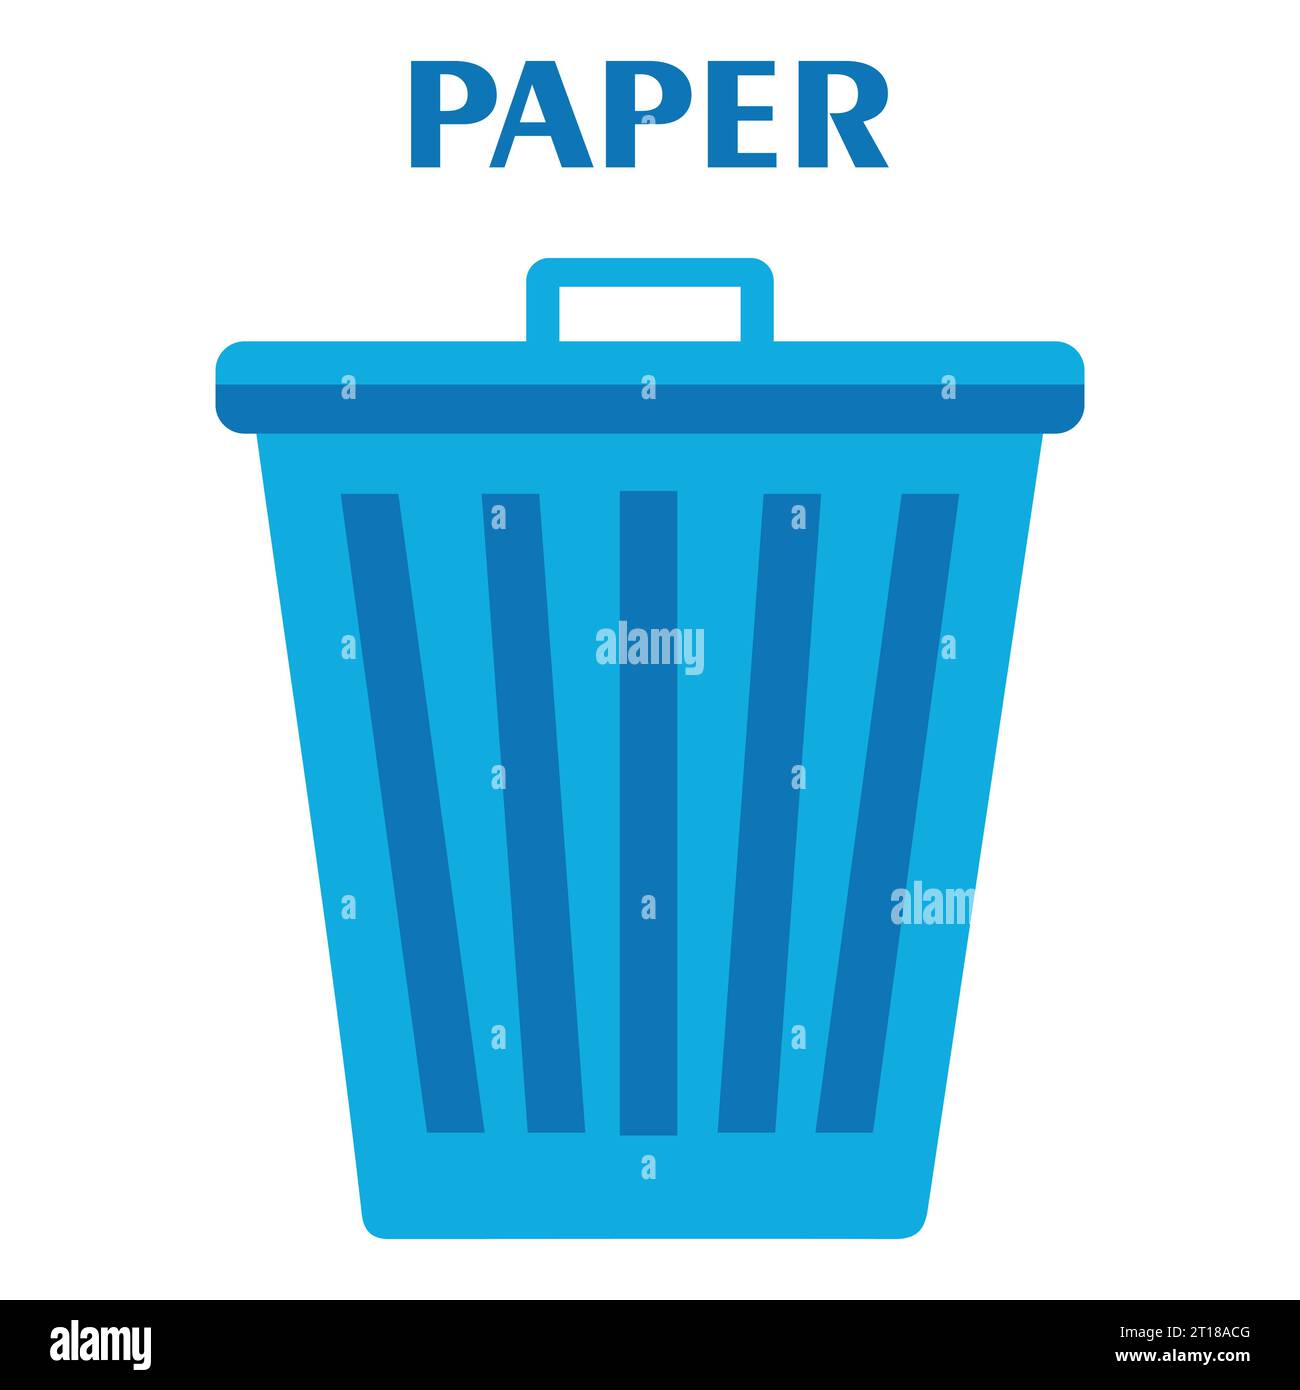 https://c8.alamy.com/comp/2T18ACG/blue-garbage-sorting-container-illustration-vector-plastic-recycle-trash-bin-for-paper-trash-can-icon-in-flat-waste-recycling-environmental-protec-2T18ACG.jpg